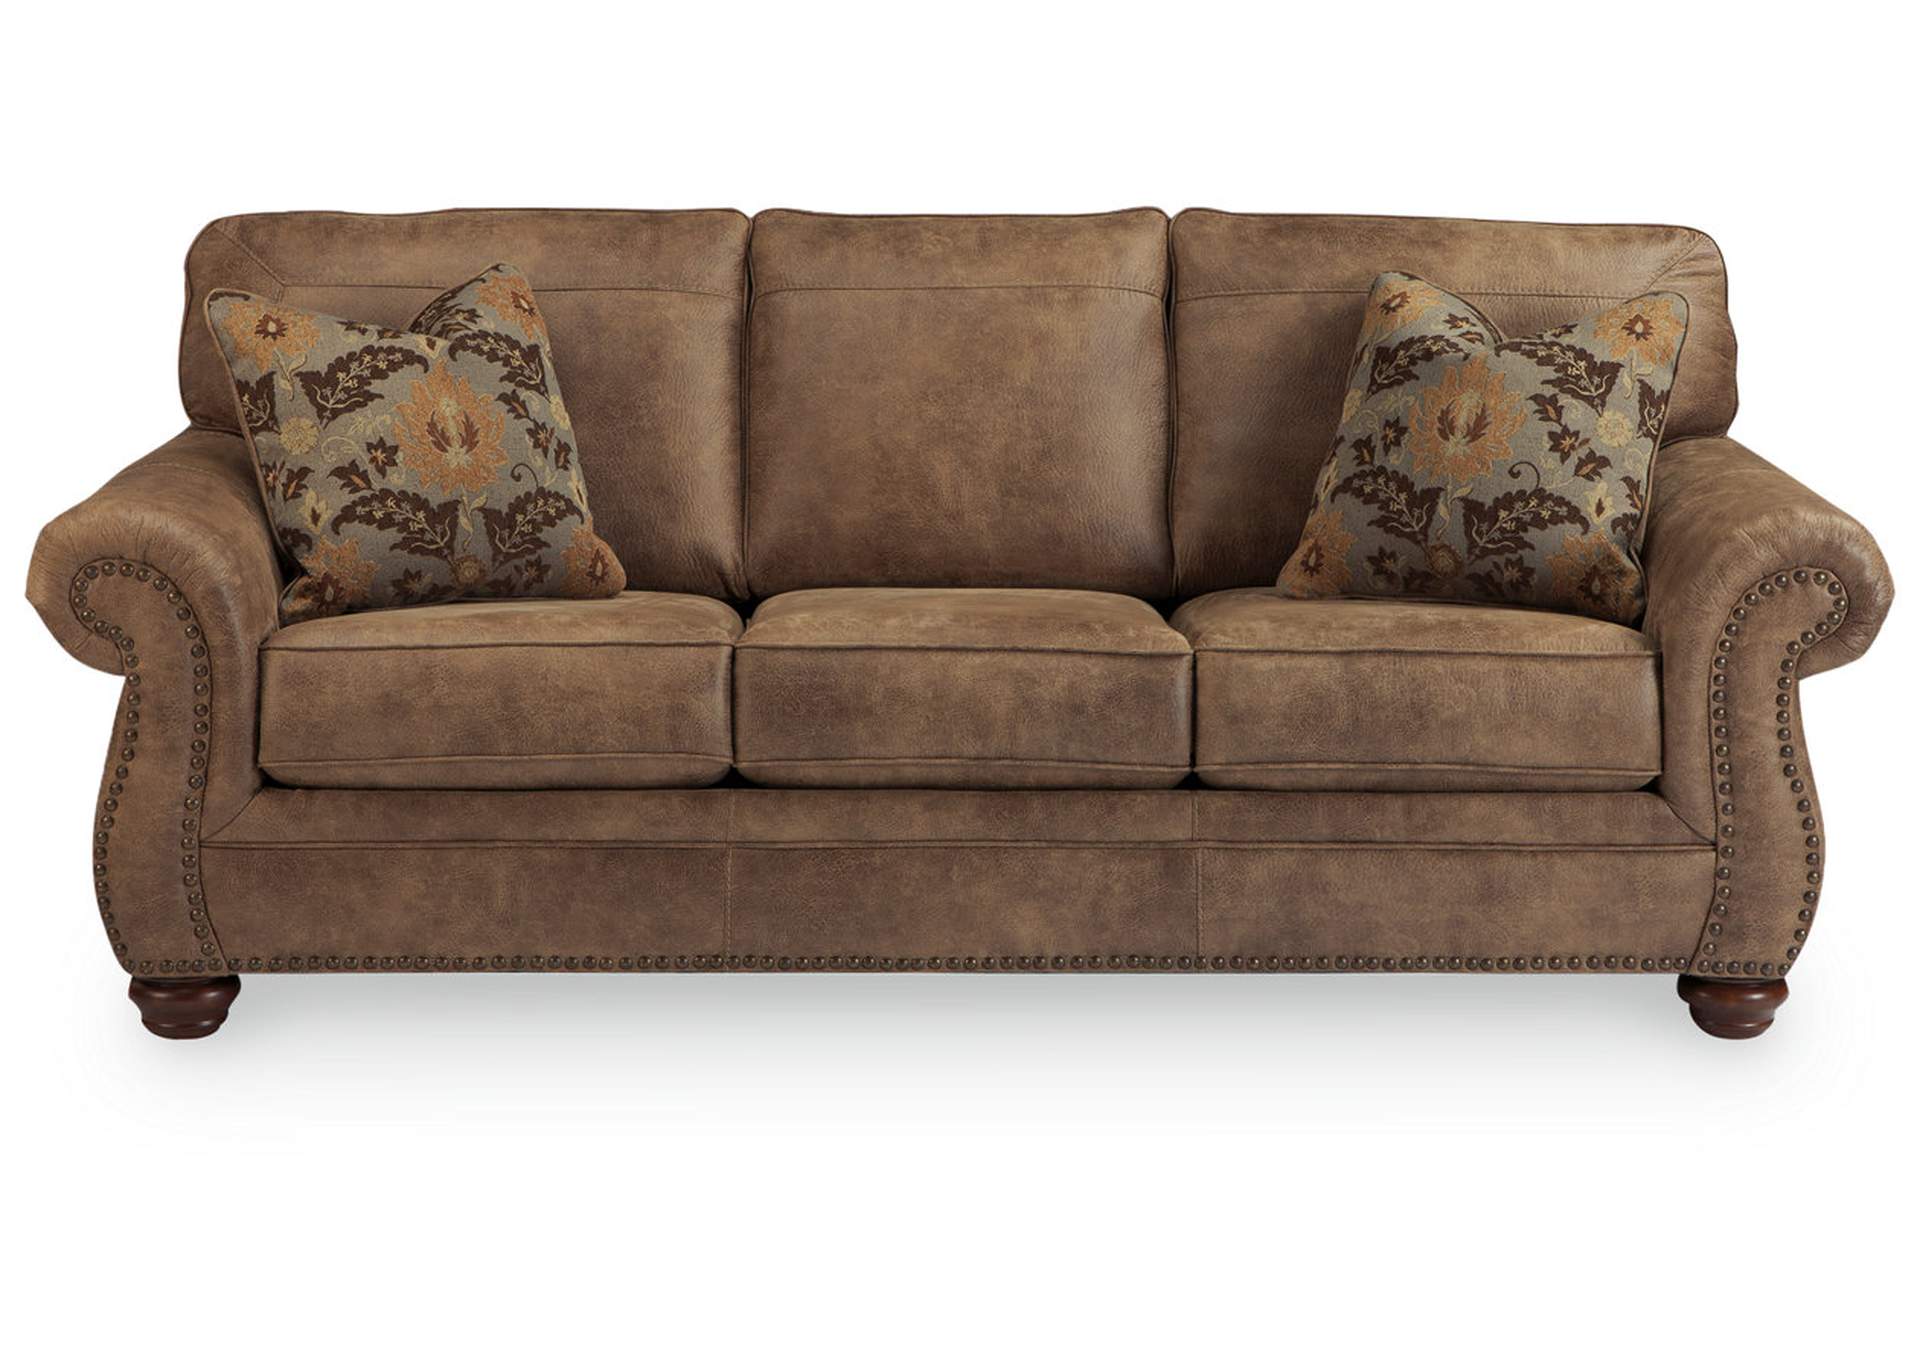 Larkinhurst Sofa and Loveseat with Recliner,Signature Design By Ashley